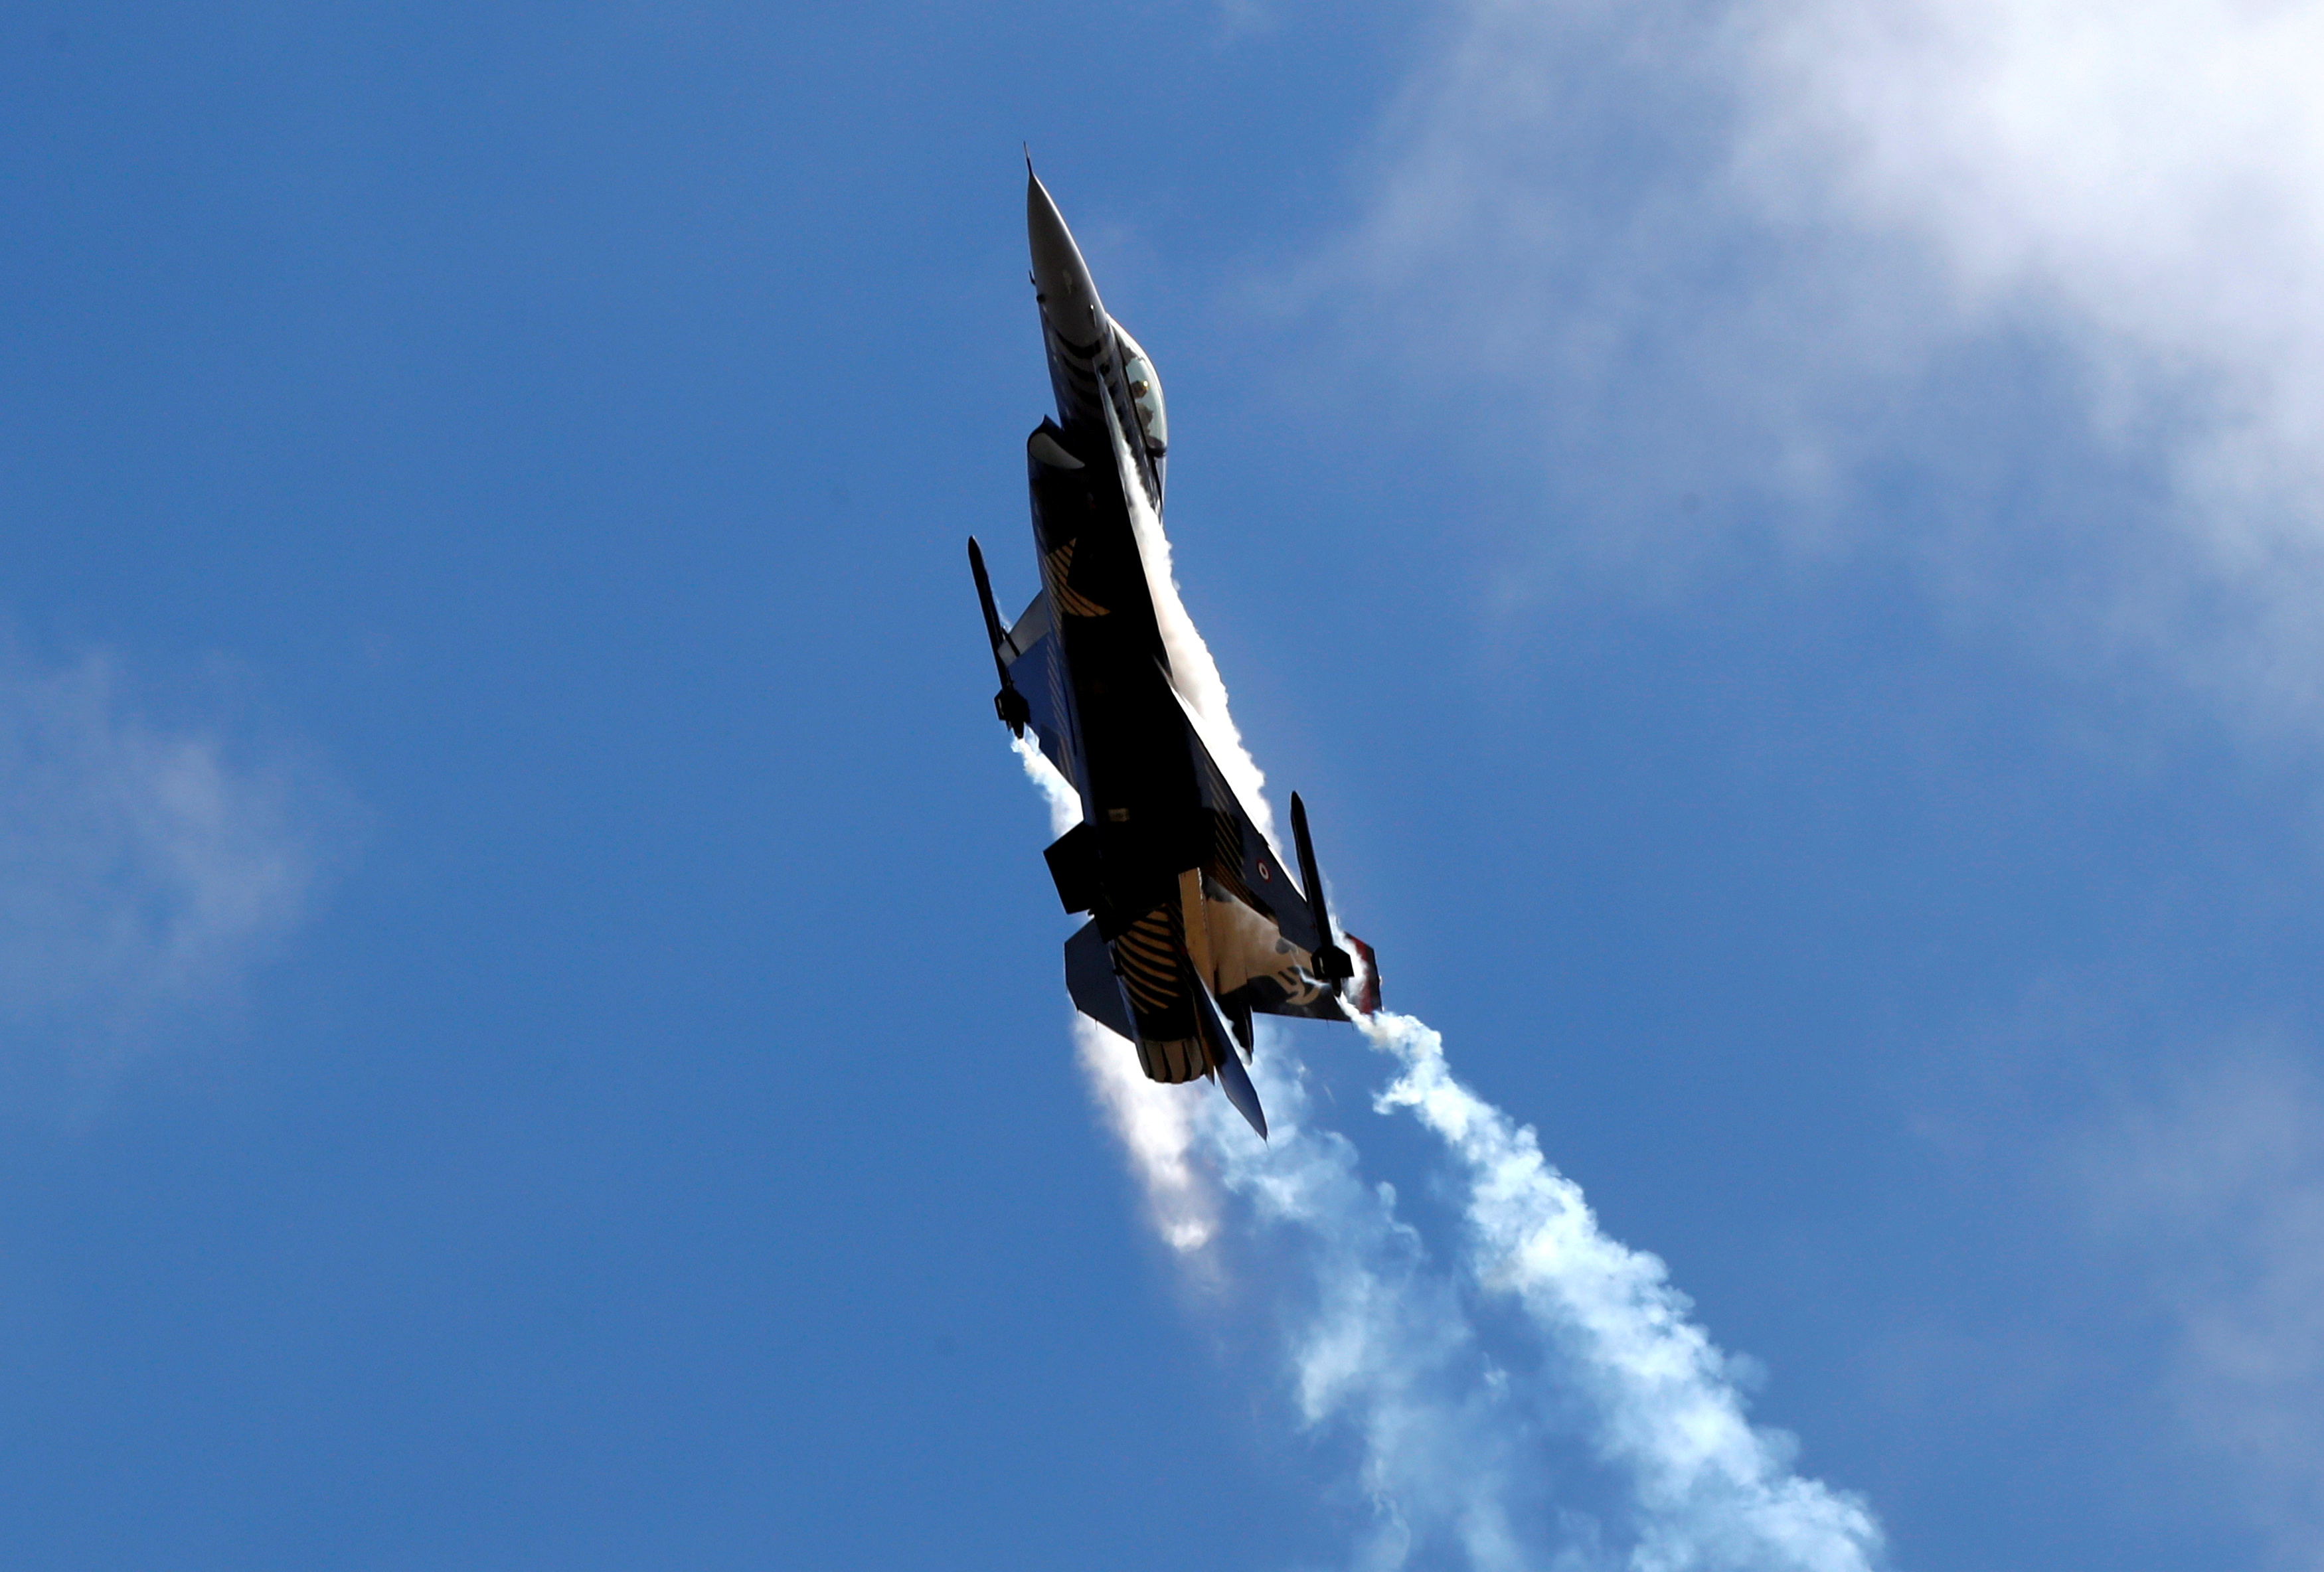 An F-16 aircraft of the Turkish Stars aerobatic team of the Turkish Air Force performs during Teknofest airshow over the city's new airport under construction in Istanbul